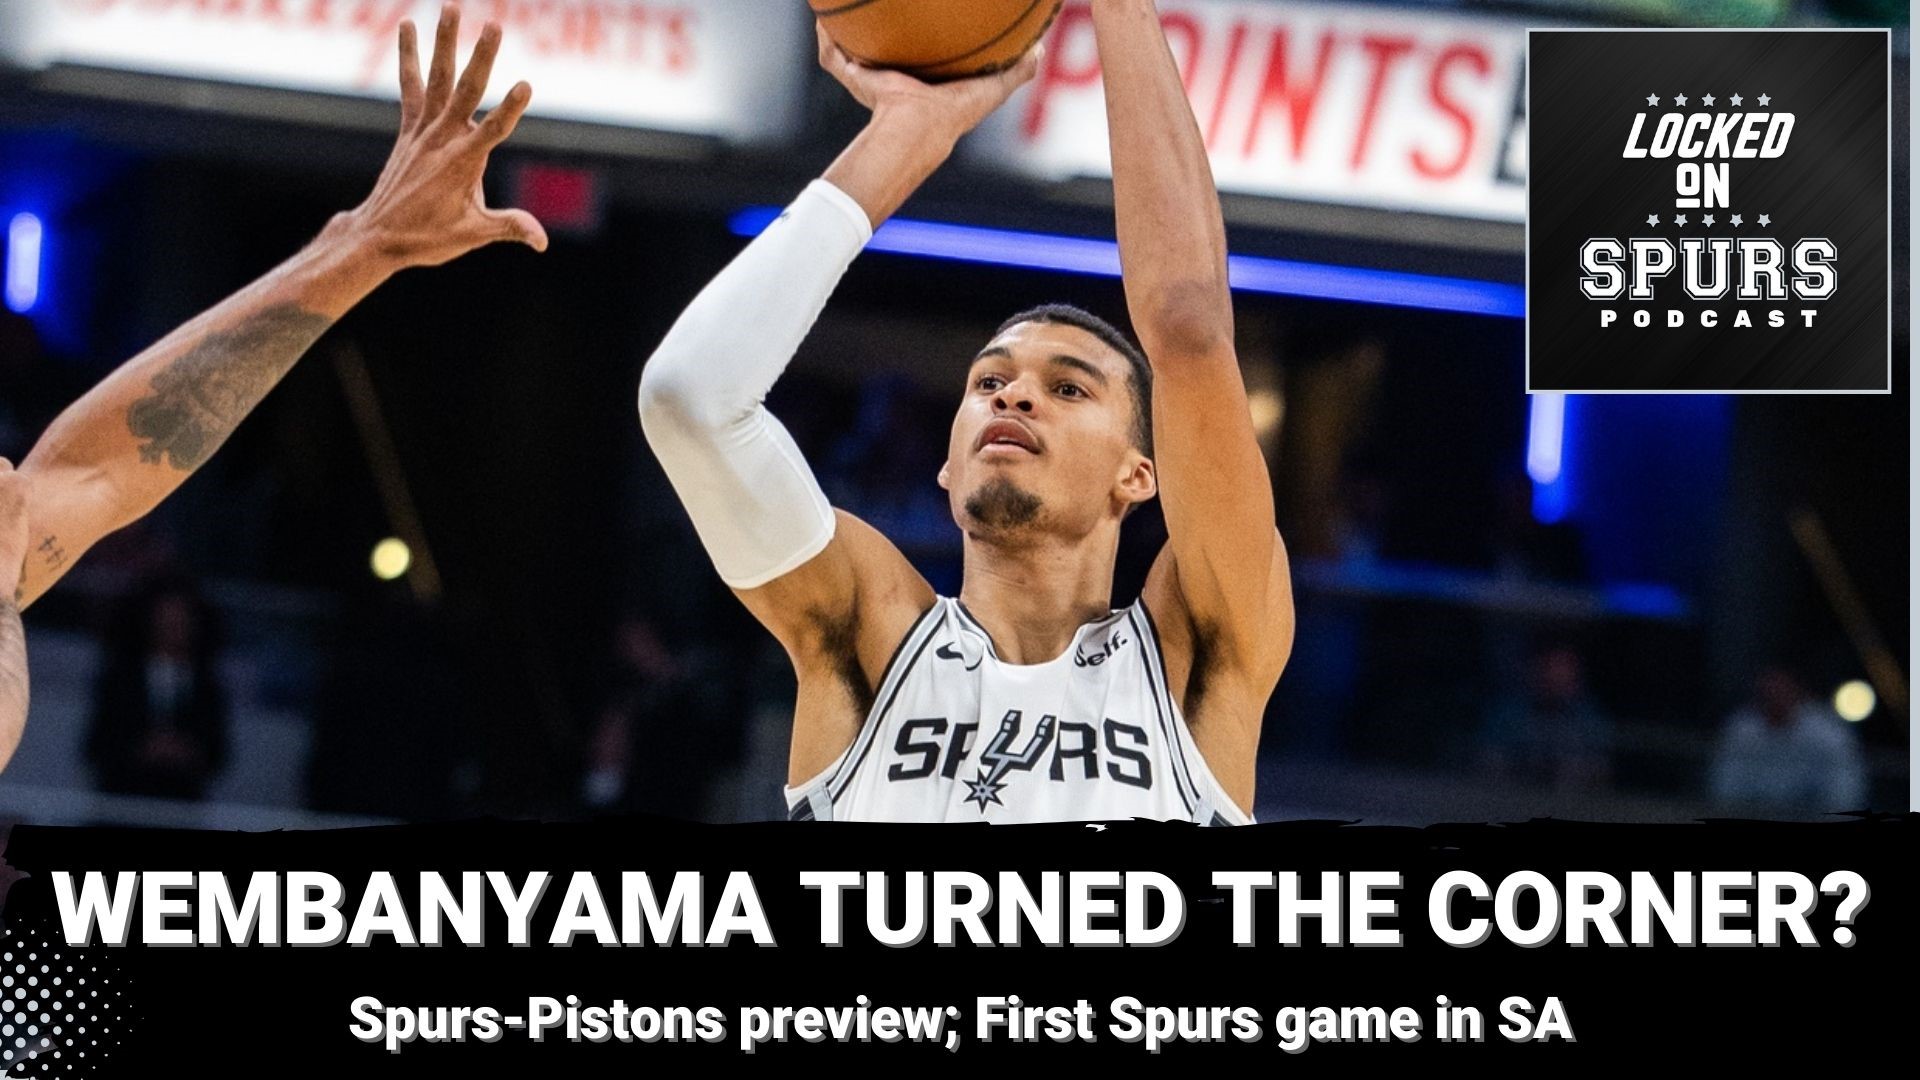 Also, a quick Spurs-Pistons preview and memories from the very first Spurs game in San Antonio.